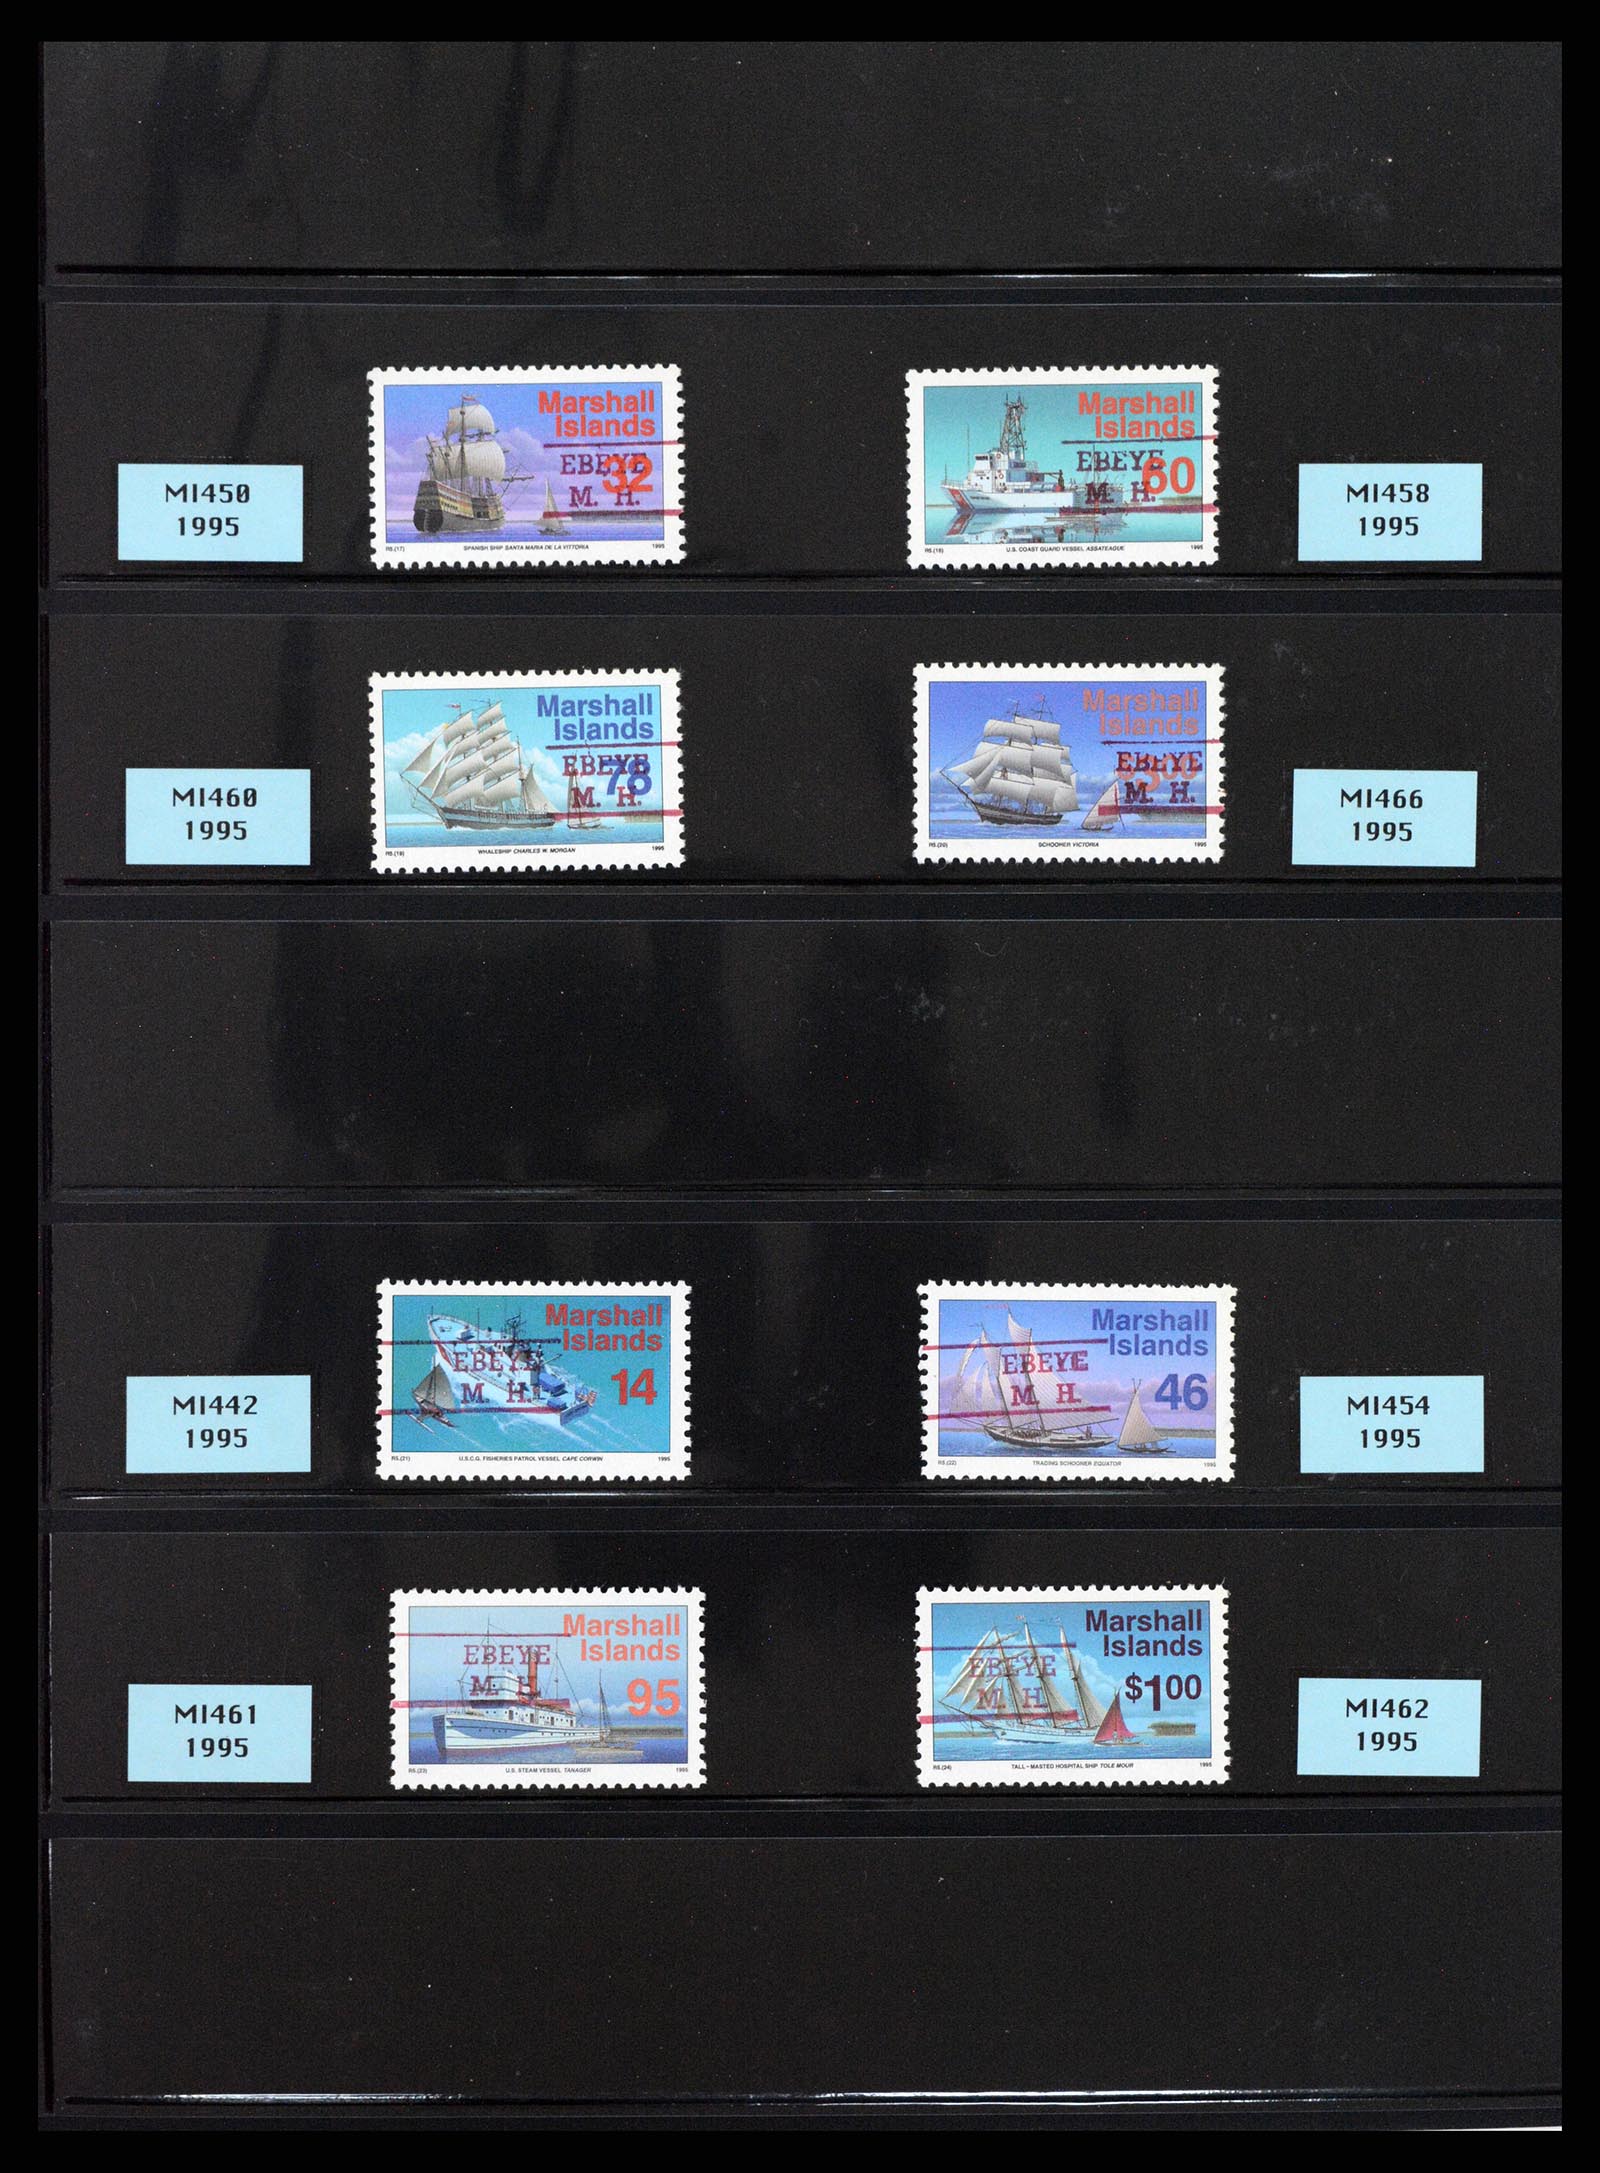 37736 006 - Stamp collection 37736 USA territories pre-cancels 1959-1995.